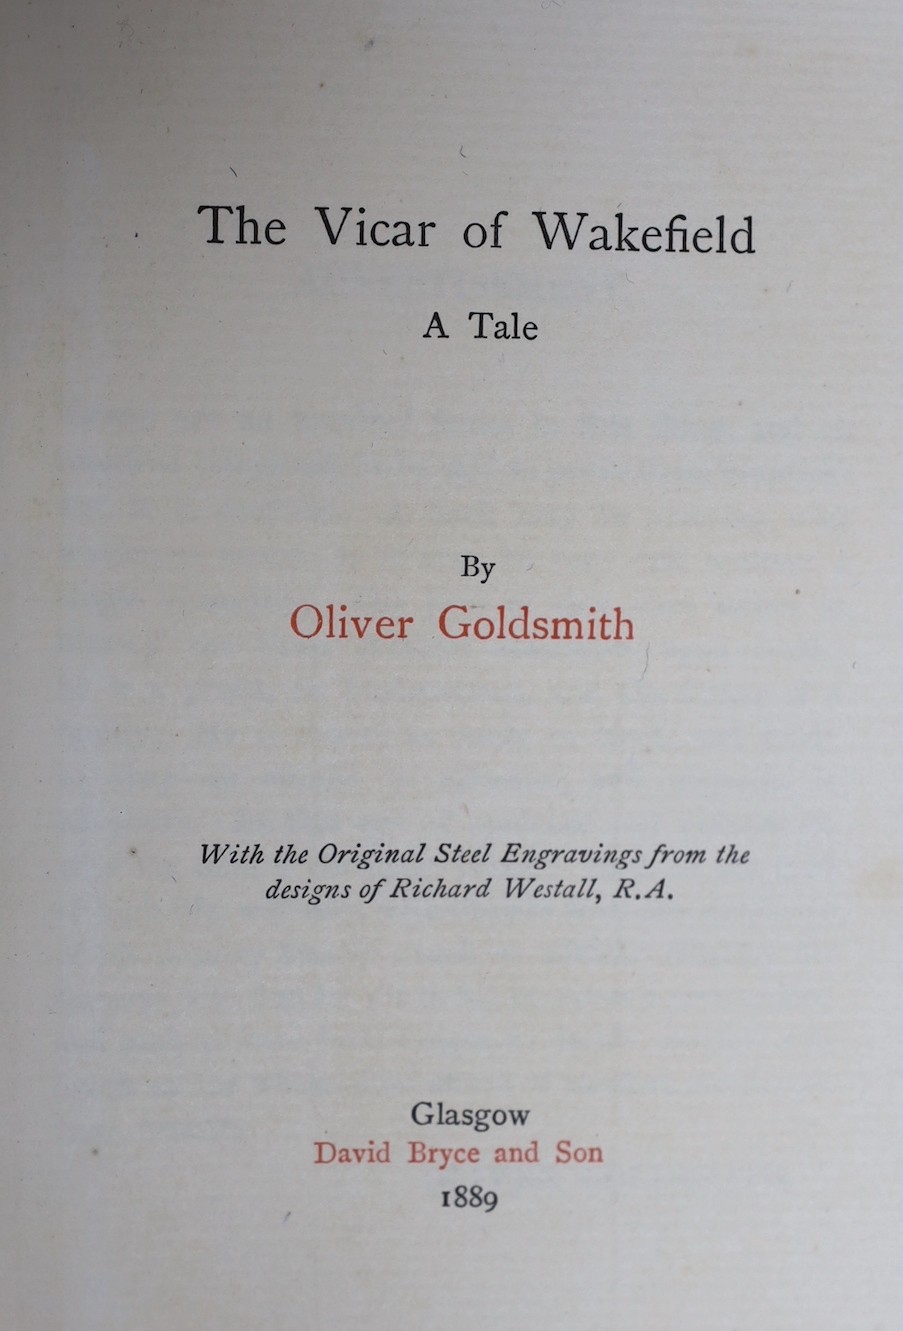 ° ° Richard Westall R.A. (illustrator) - Three works - Goldsmith, Oliver - The Vicar of Wakefield - Image 2 of 3